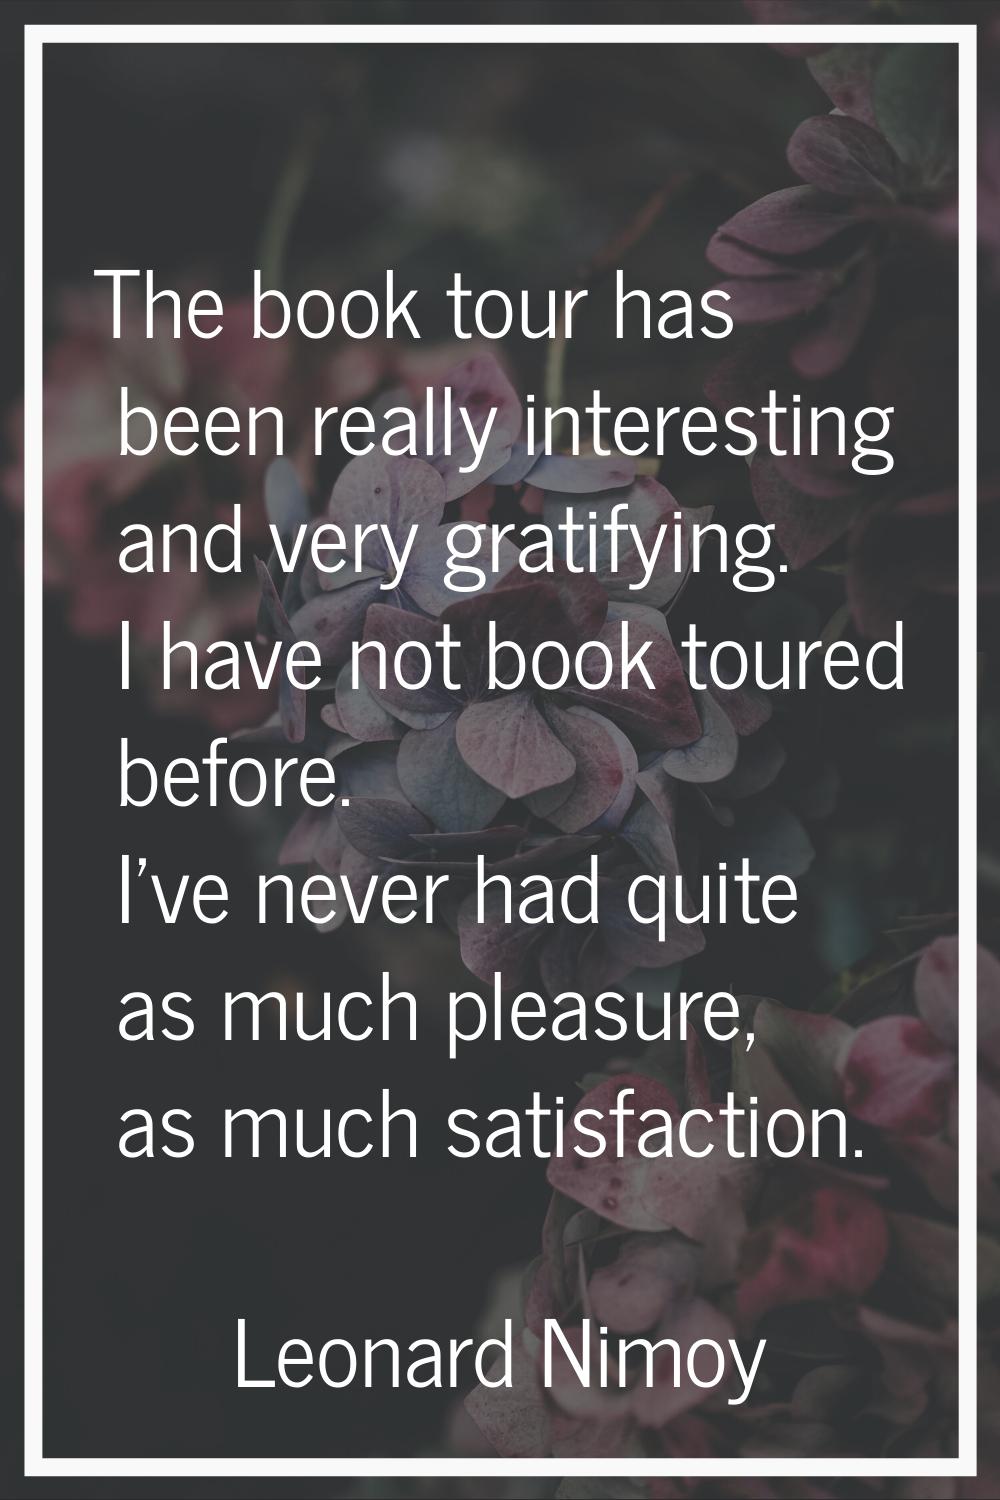 The book tour has been really interesting and very gratifying. I have not book toured before. I've 